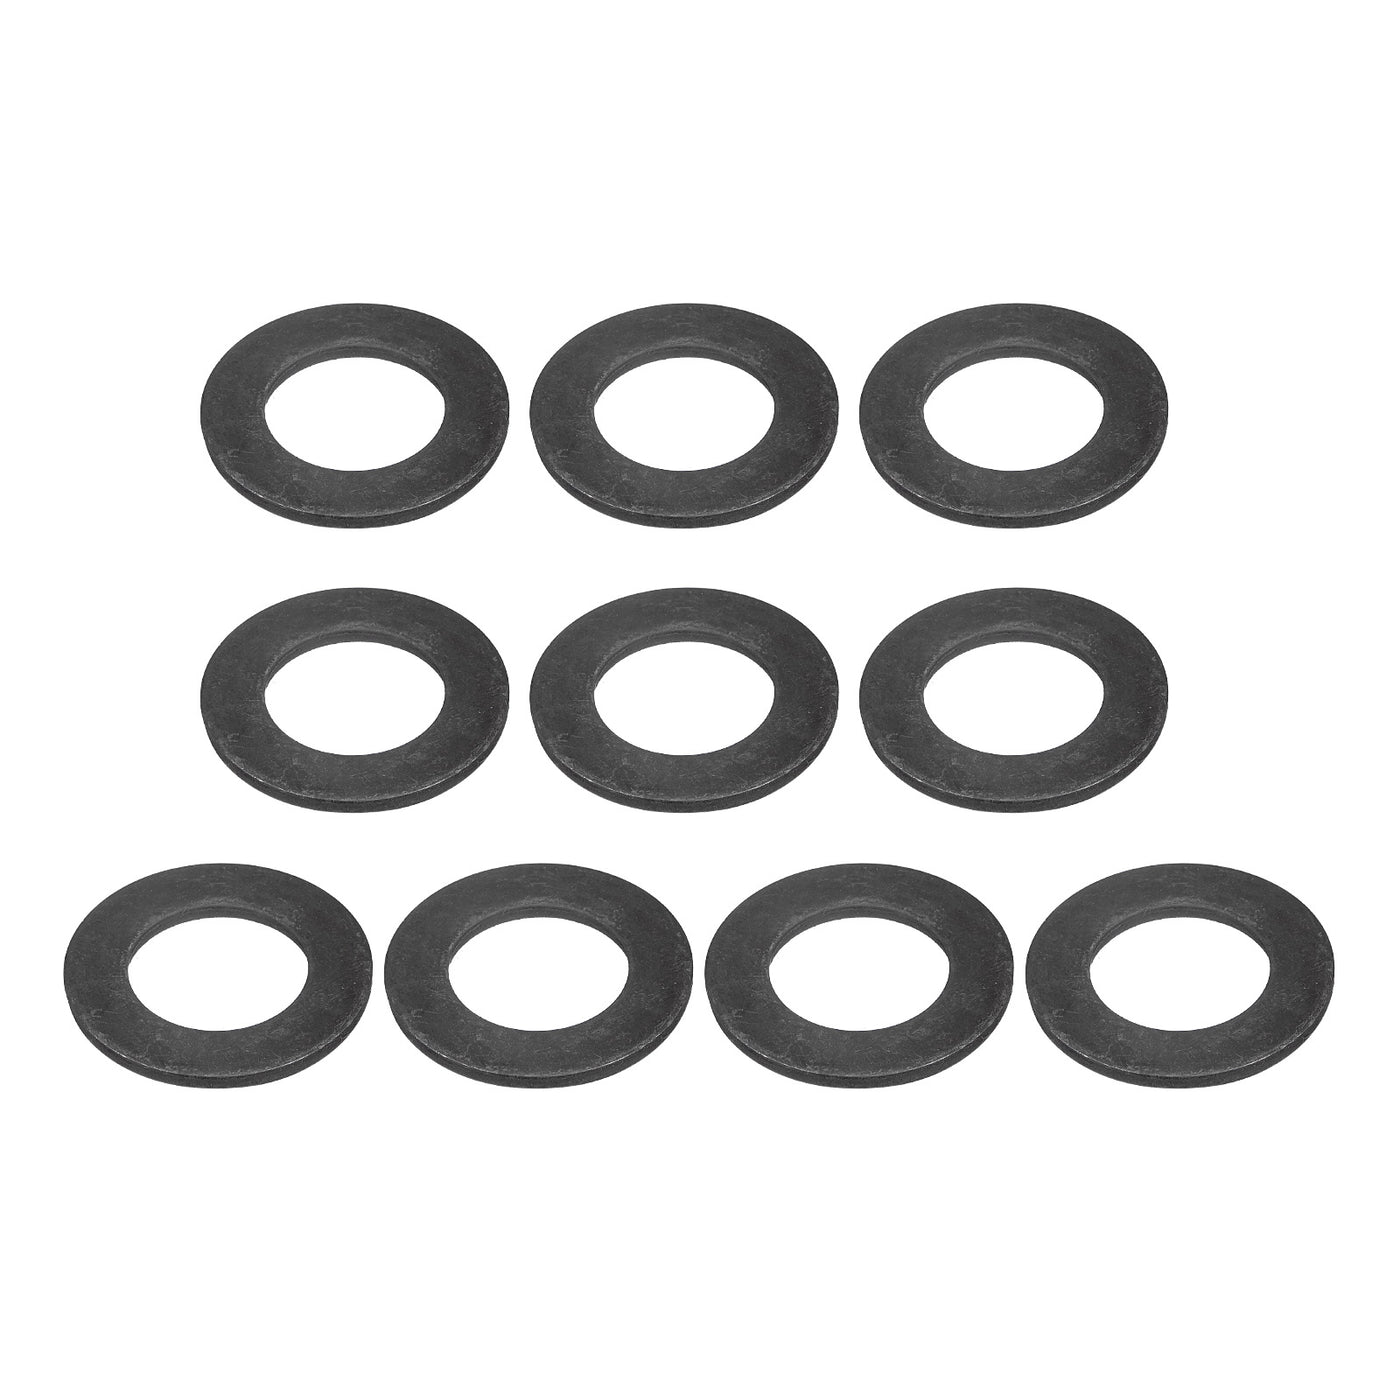 uxcell Uxcell M20 Carbon Steel Flat Washer 10pcs 21x36.5x2.8mm Grade 8.8 Alloy Steel Fasteners